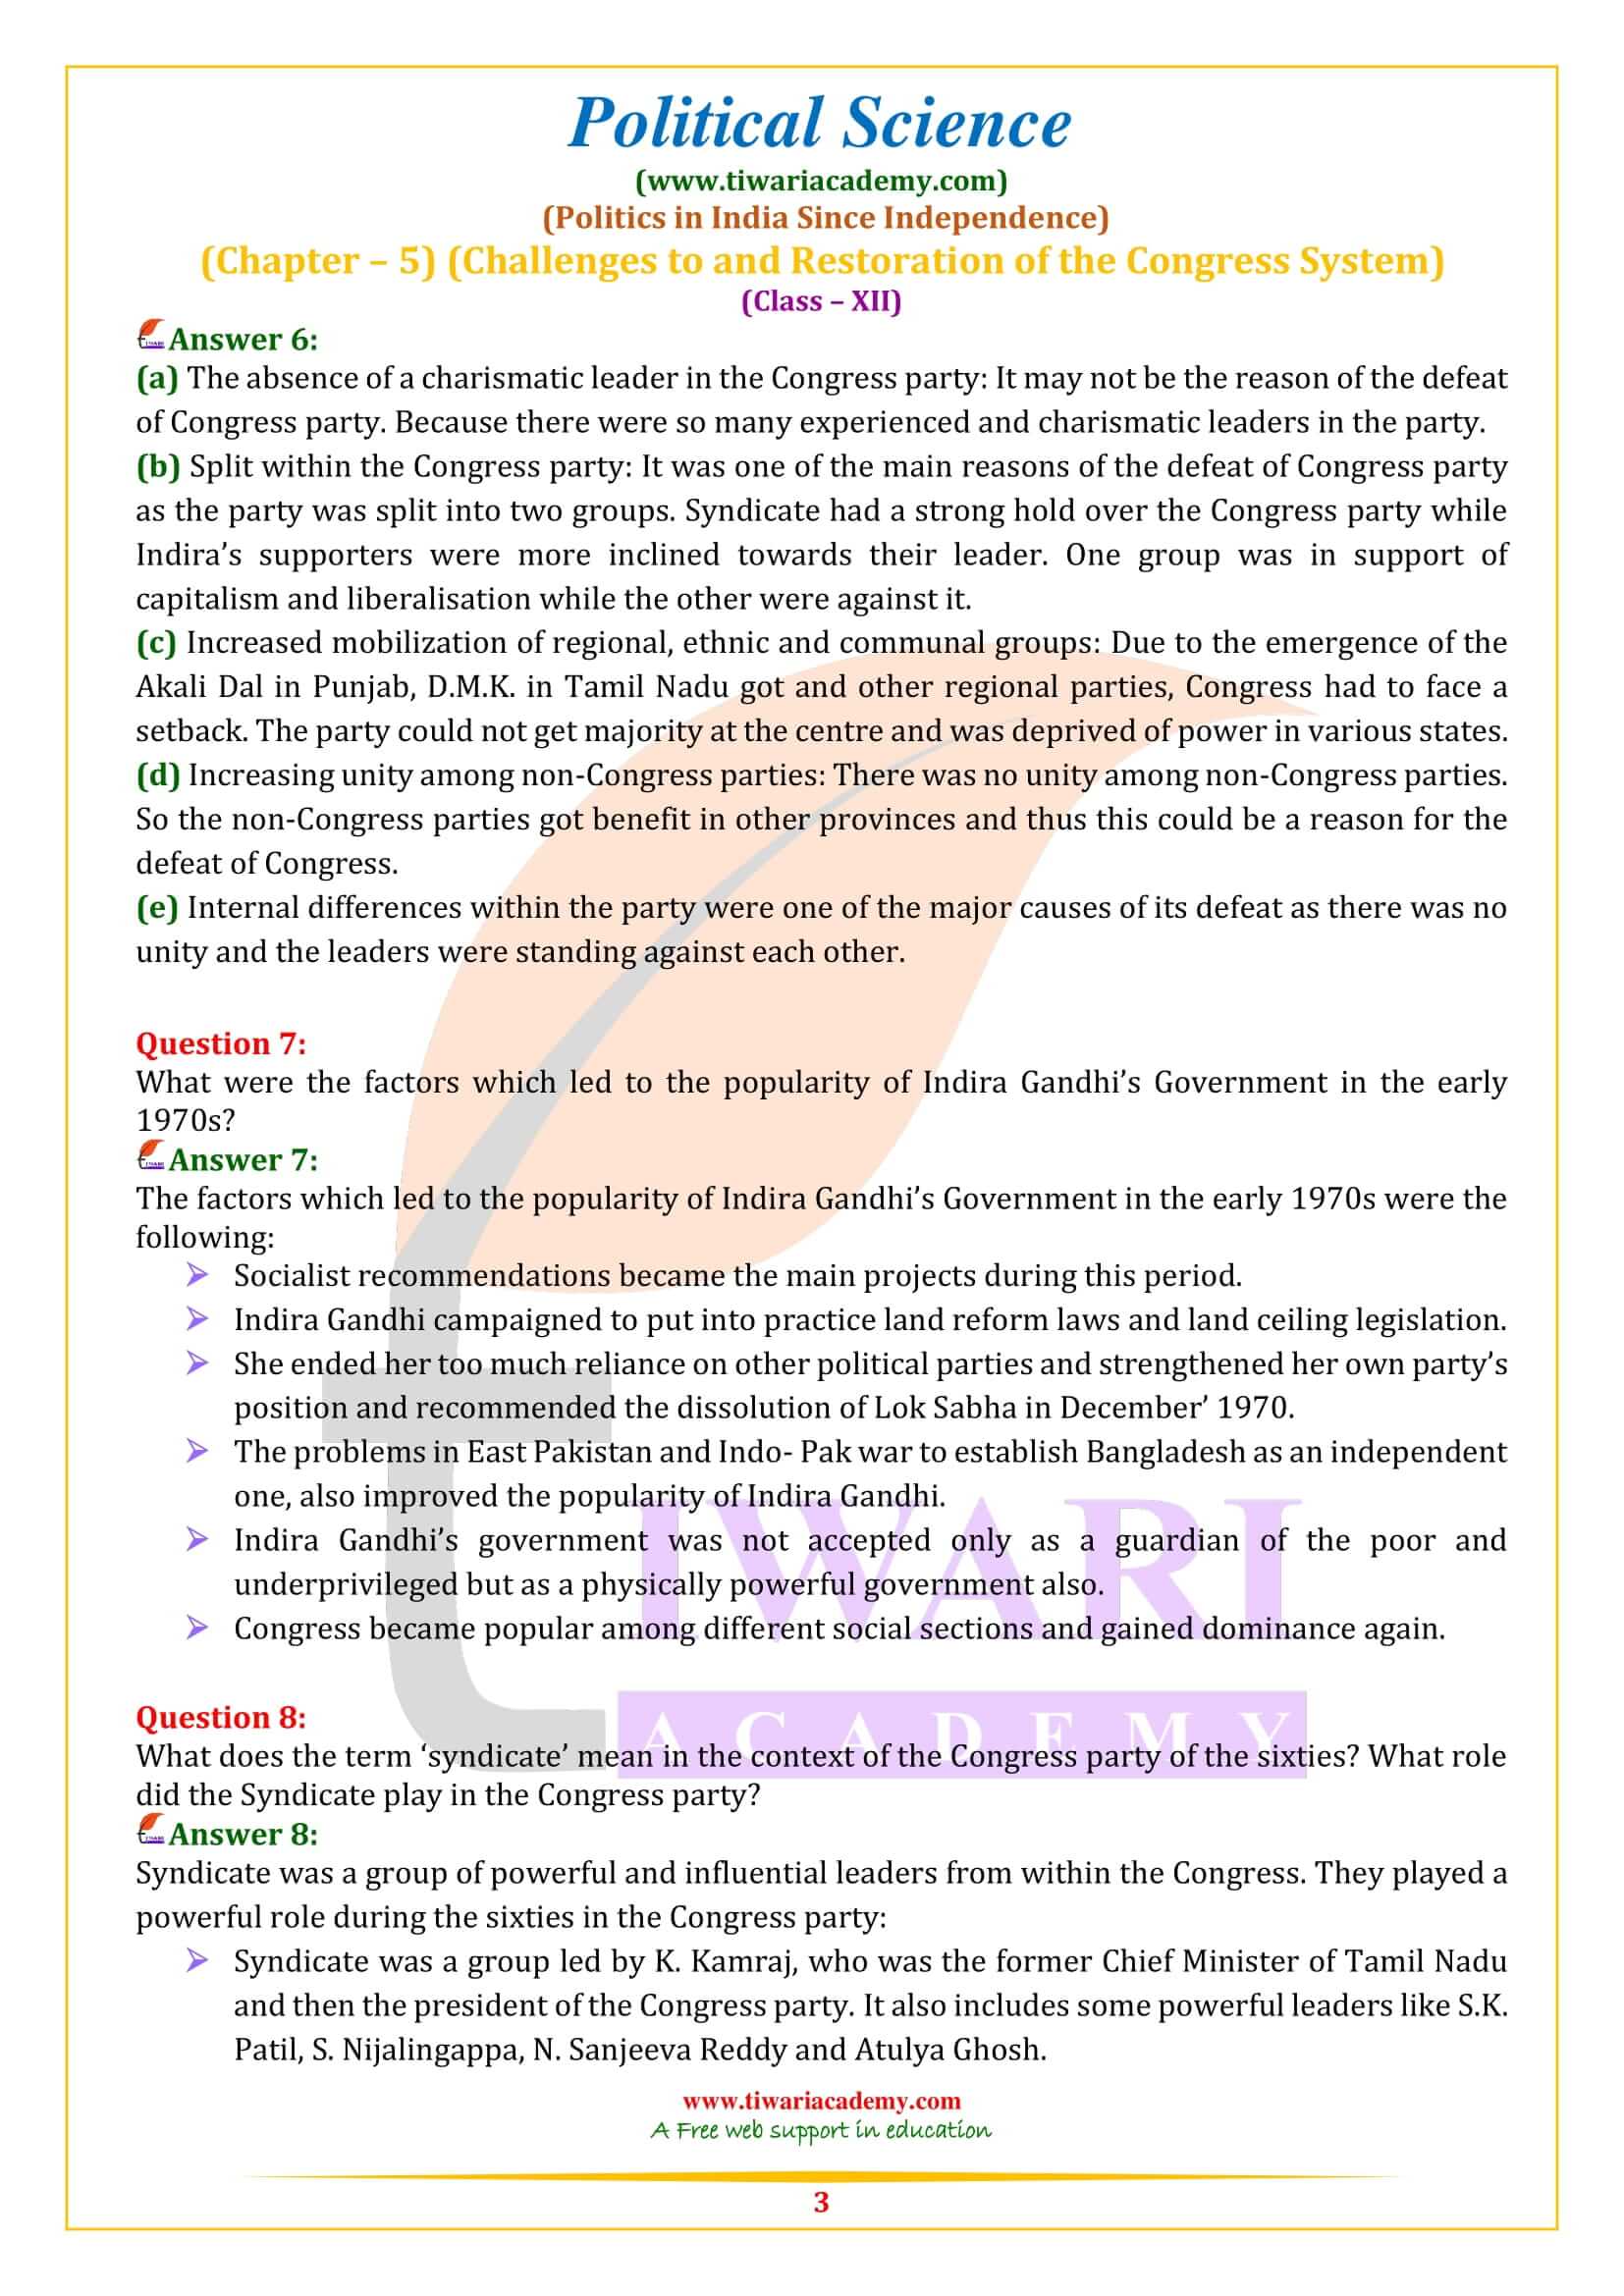 NCERT Solutions for Class 12 Political Science Part 2 Chapter 5 in English Medium